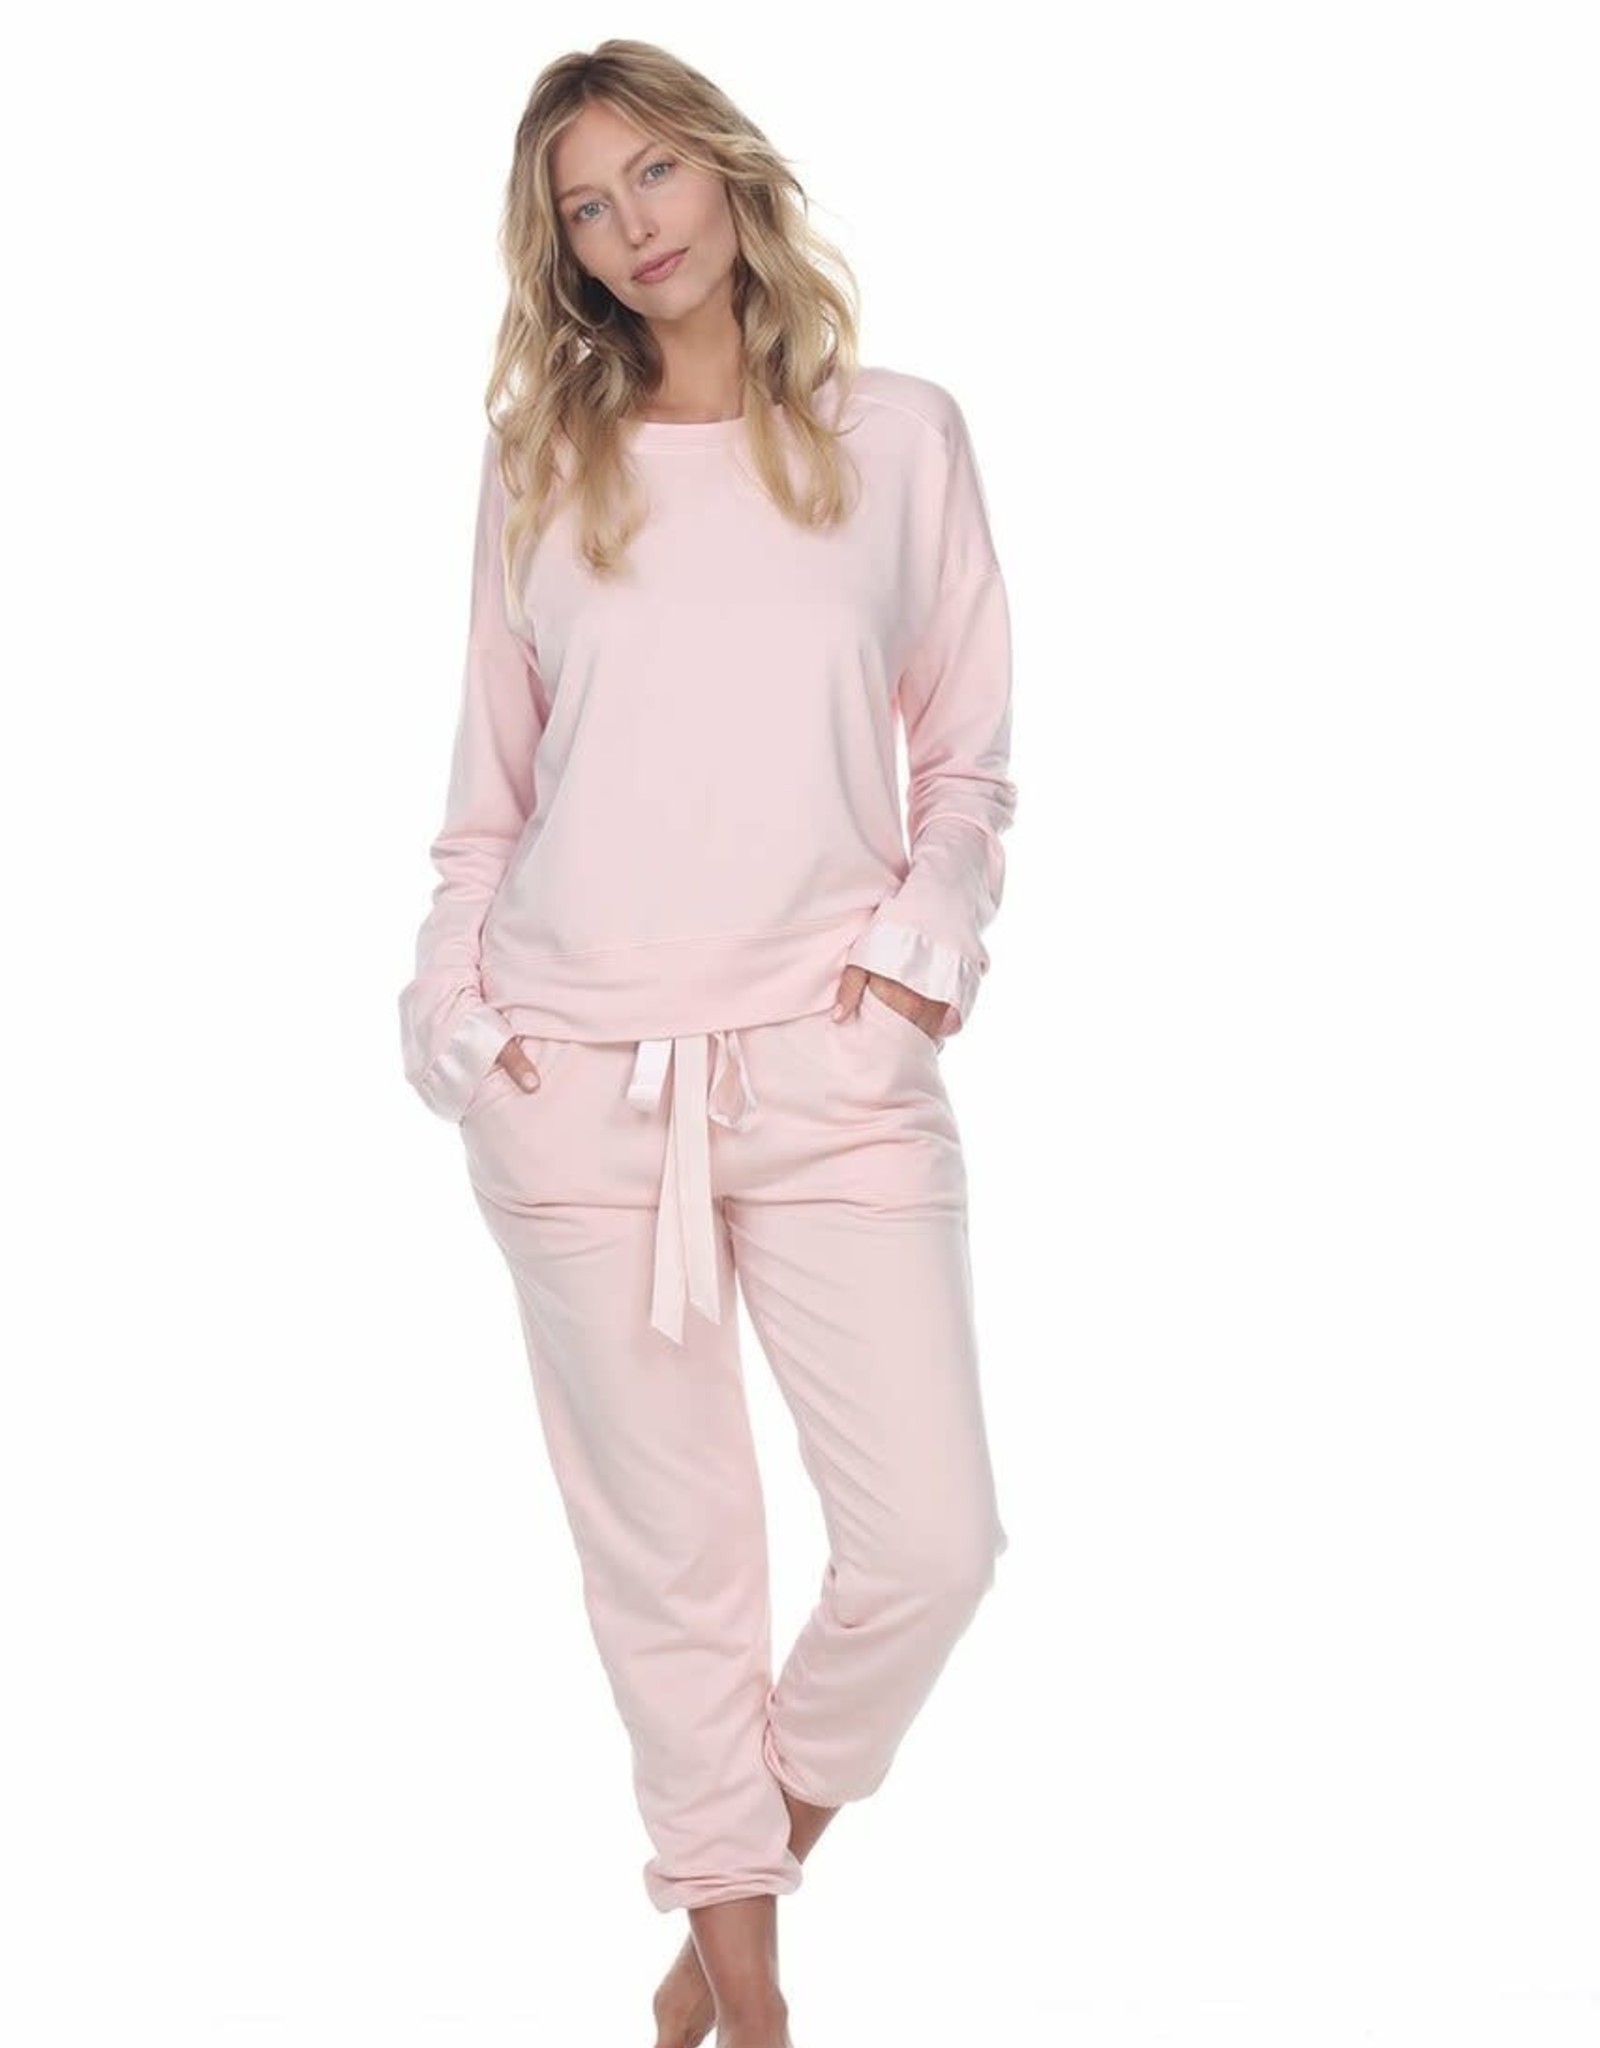 PJ Harlow Blair Sweat Pant with Satin Trim - Pretty Please Boutique & Gifts